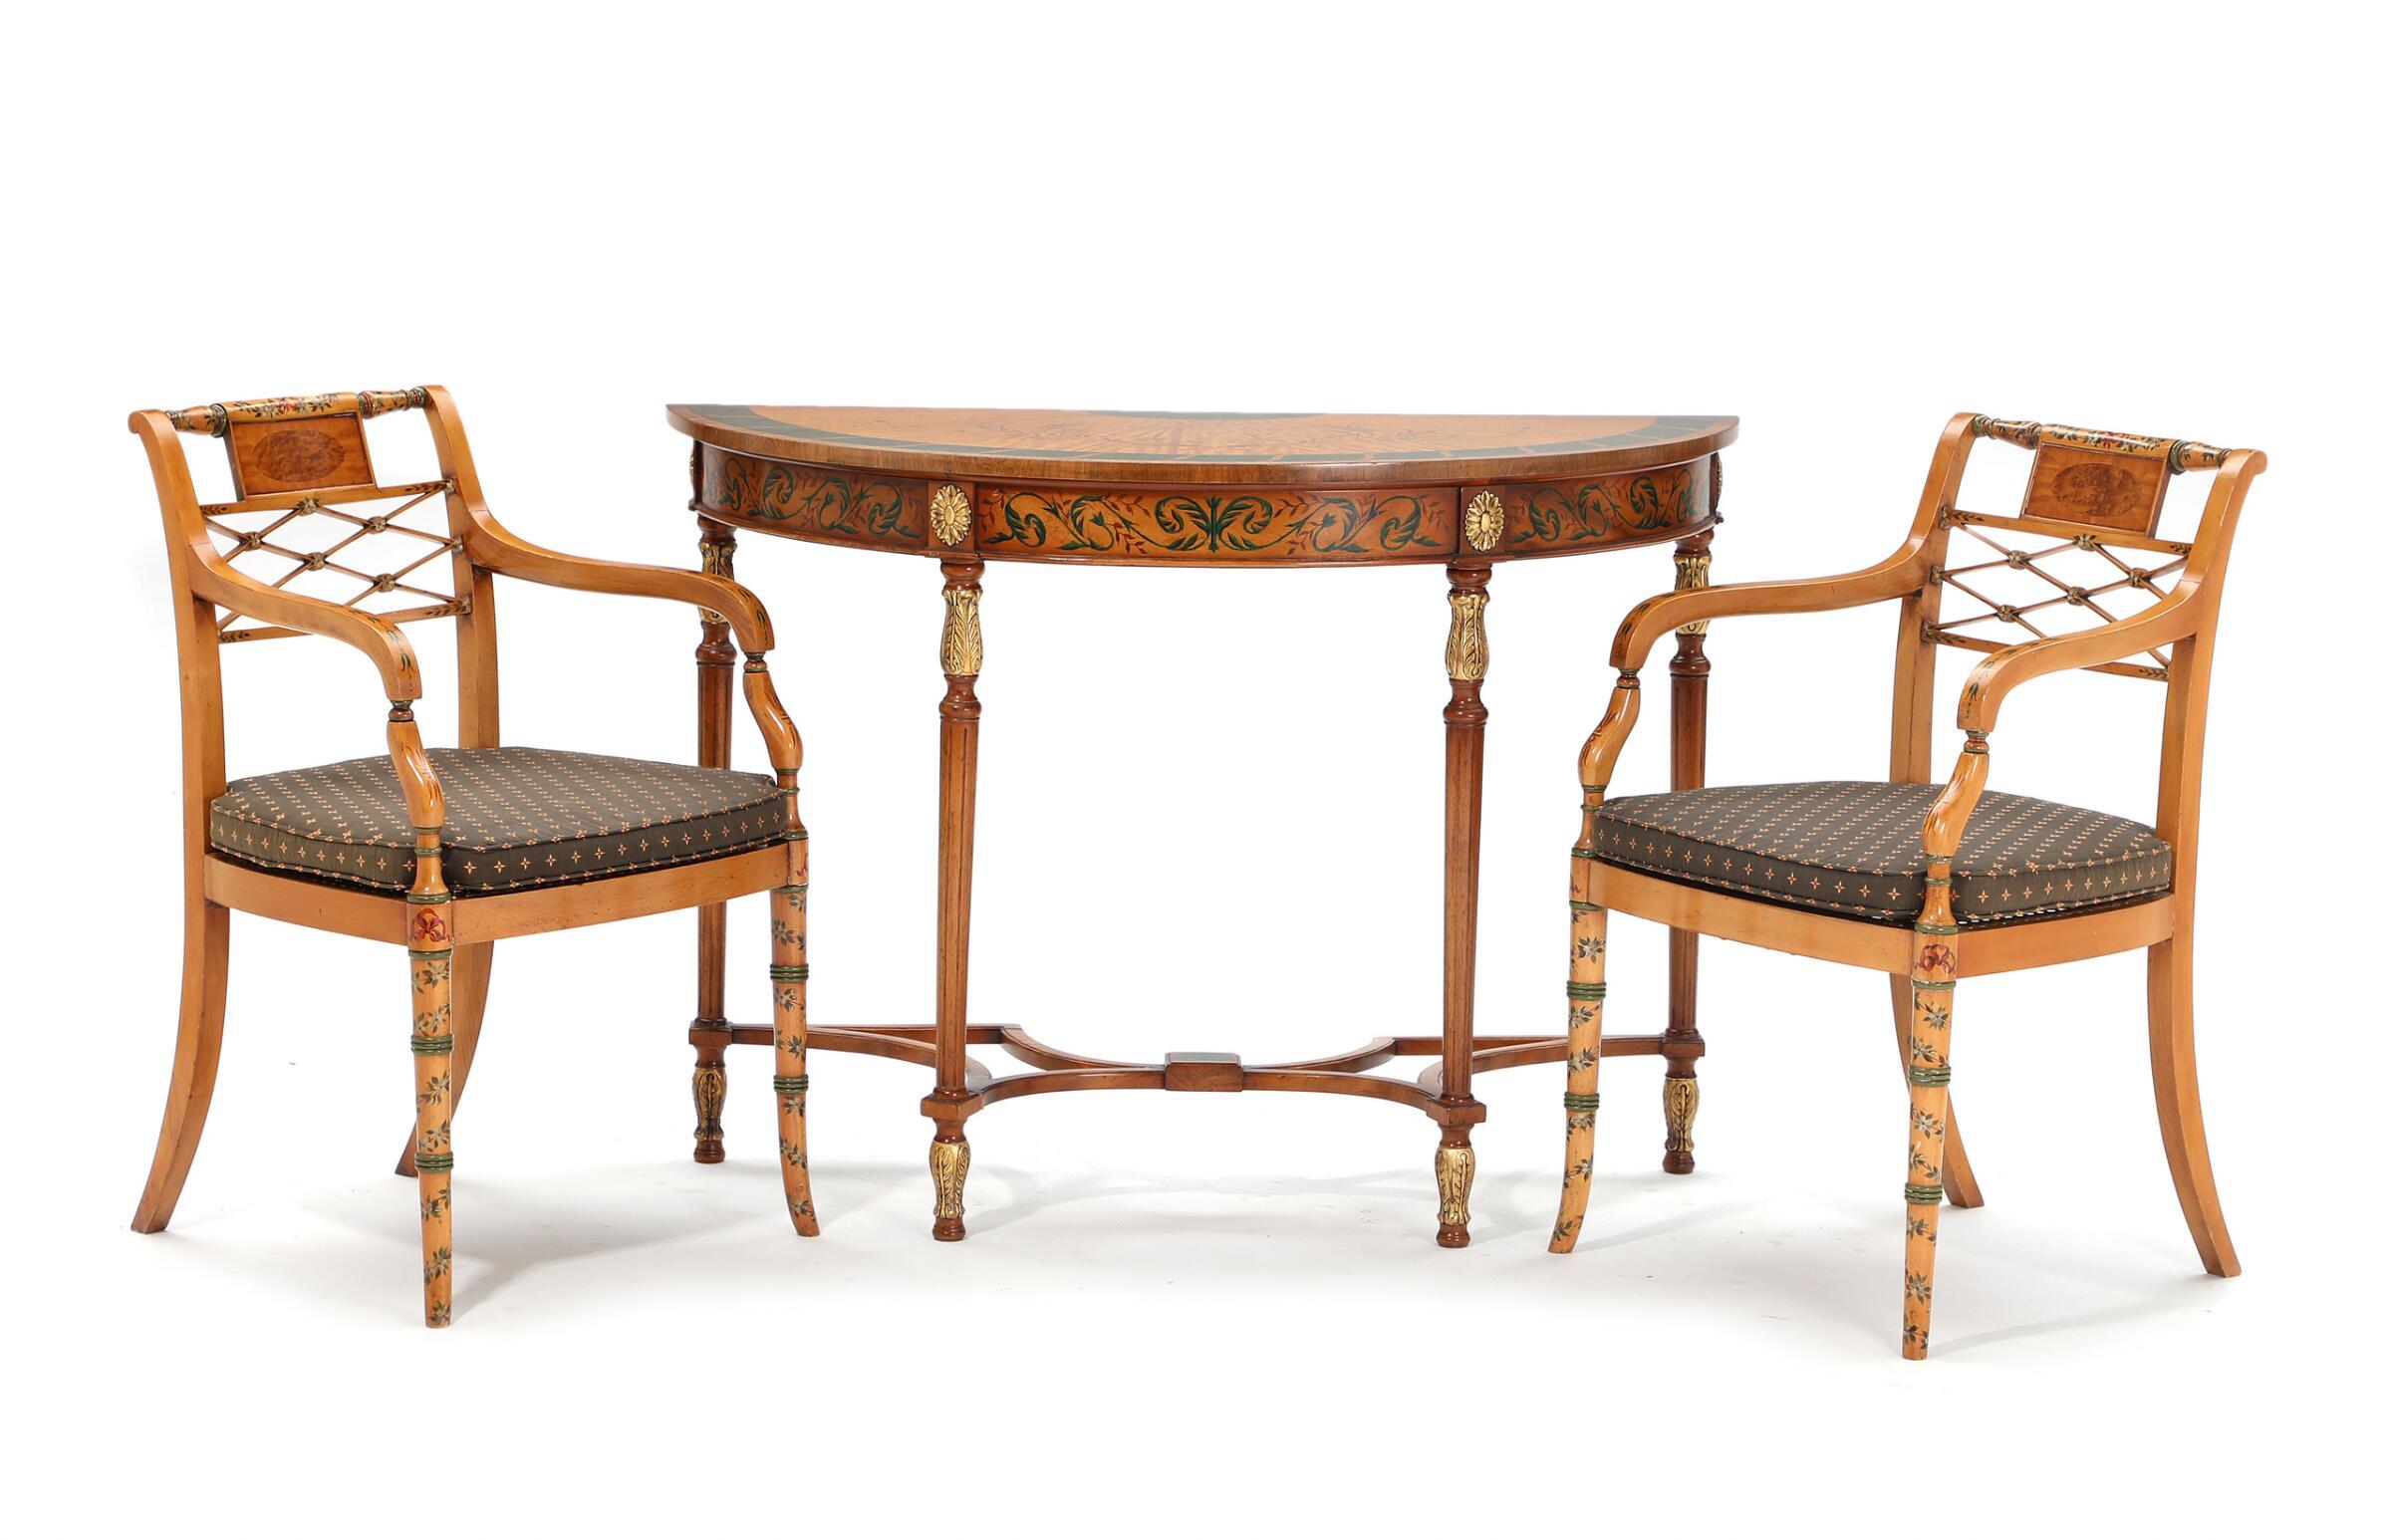 A magnificent pair of antique Sheraton style chairs date around the 1930ties. The chairs have cane seats and a loose pillow. The set is in very fine original condition.